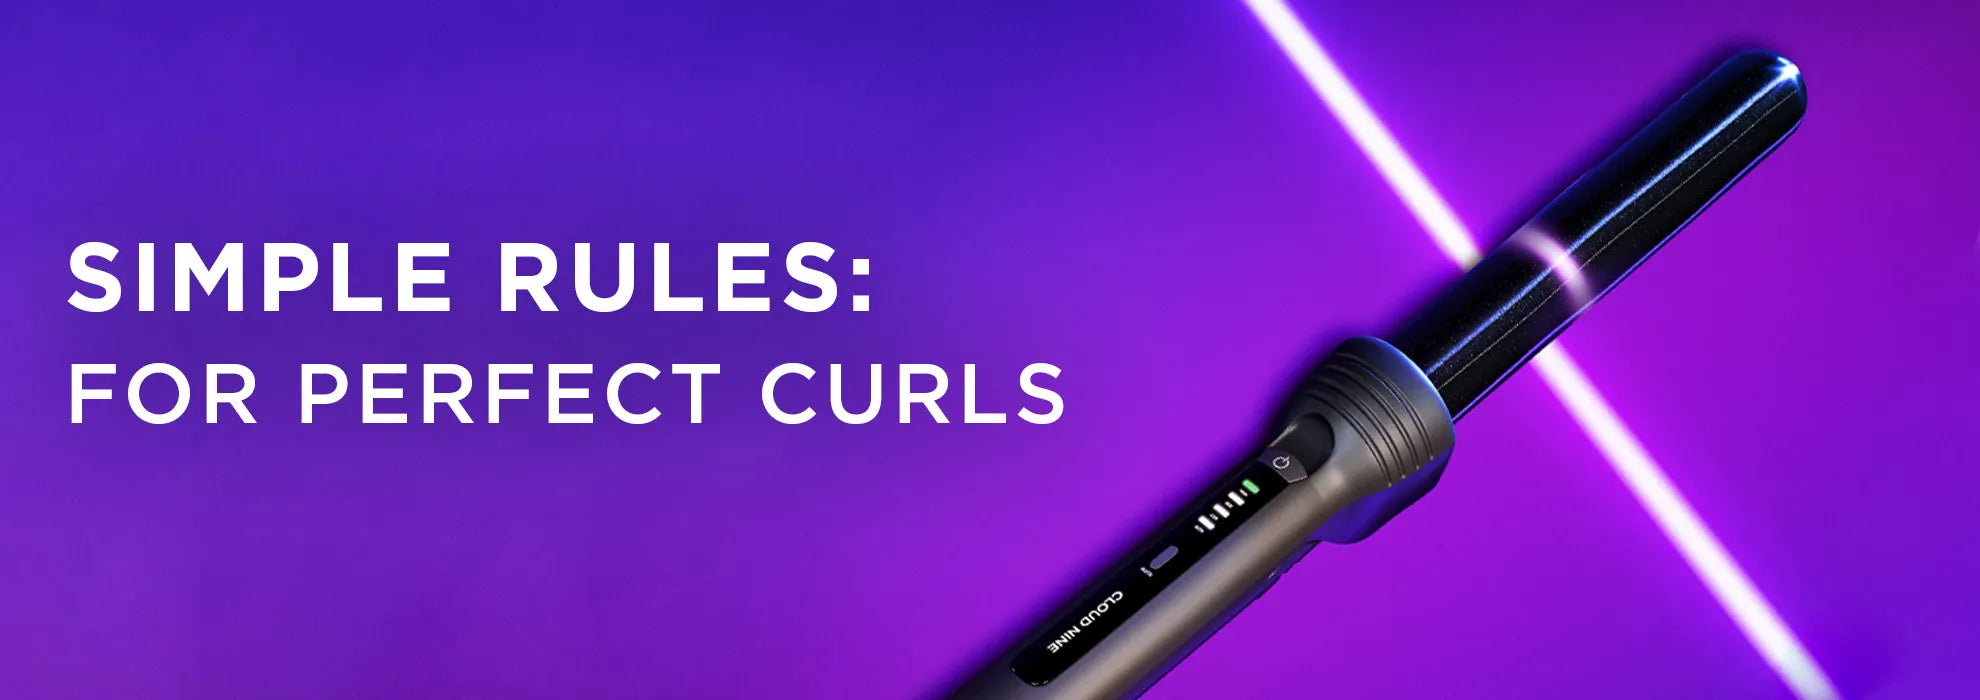 Purple image with The Curling Wand and text 'Simple rules: for perfect curls'.